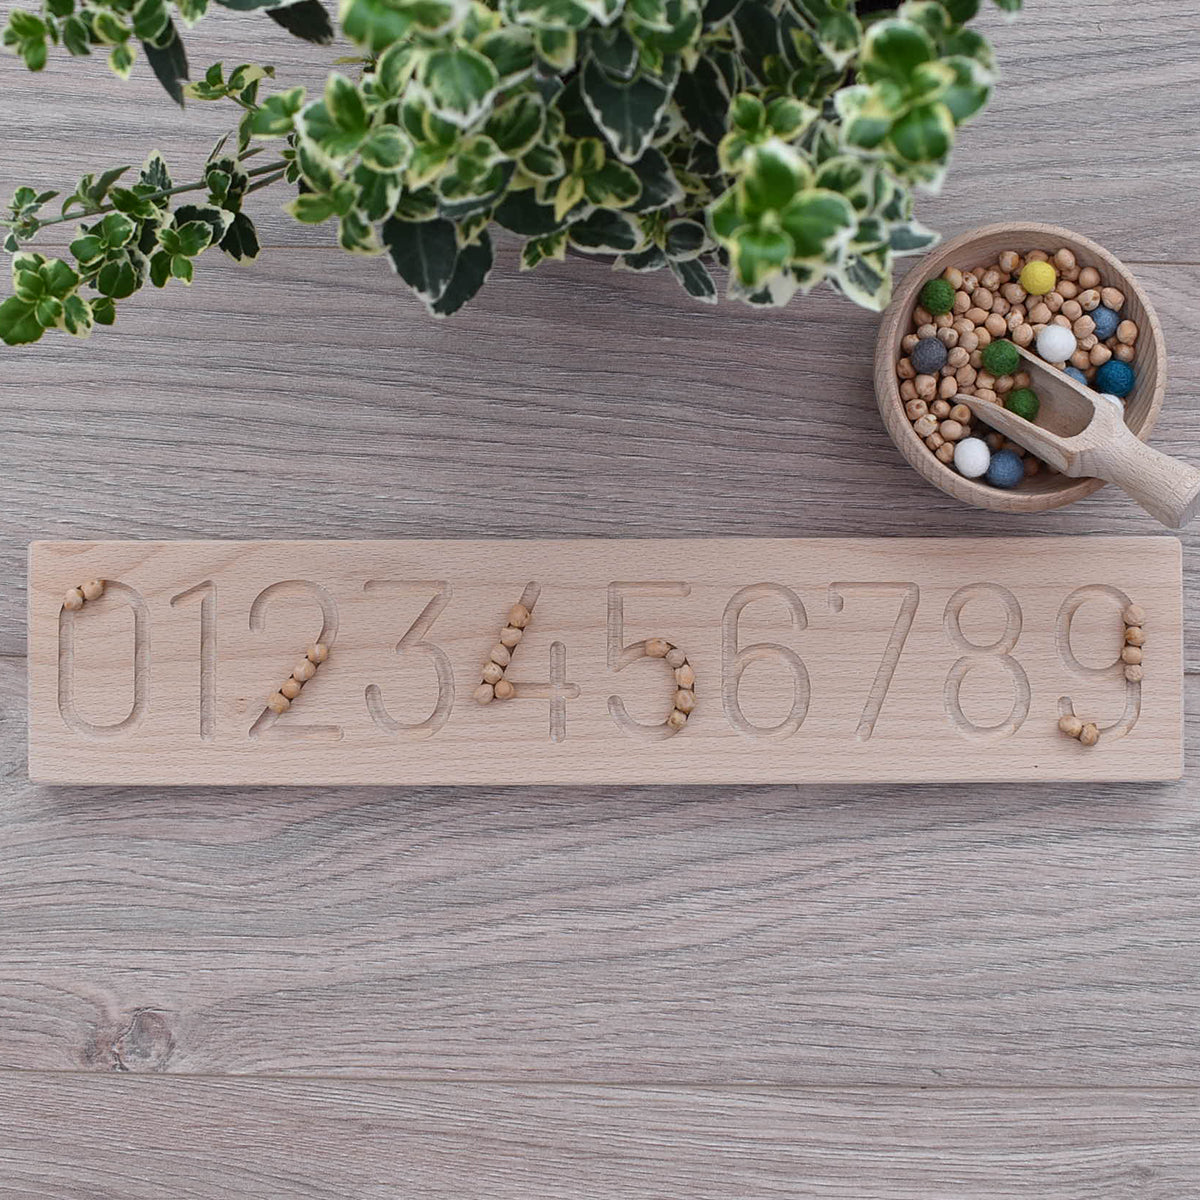 UK made wooden number board for sensory play and fine motor skills, made from sustainable Beech with chick peas and felt balls